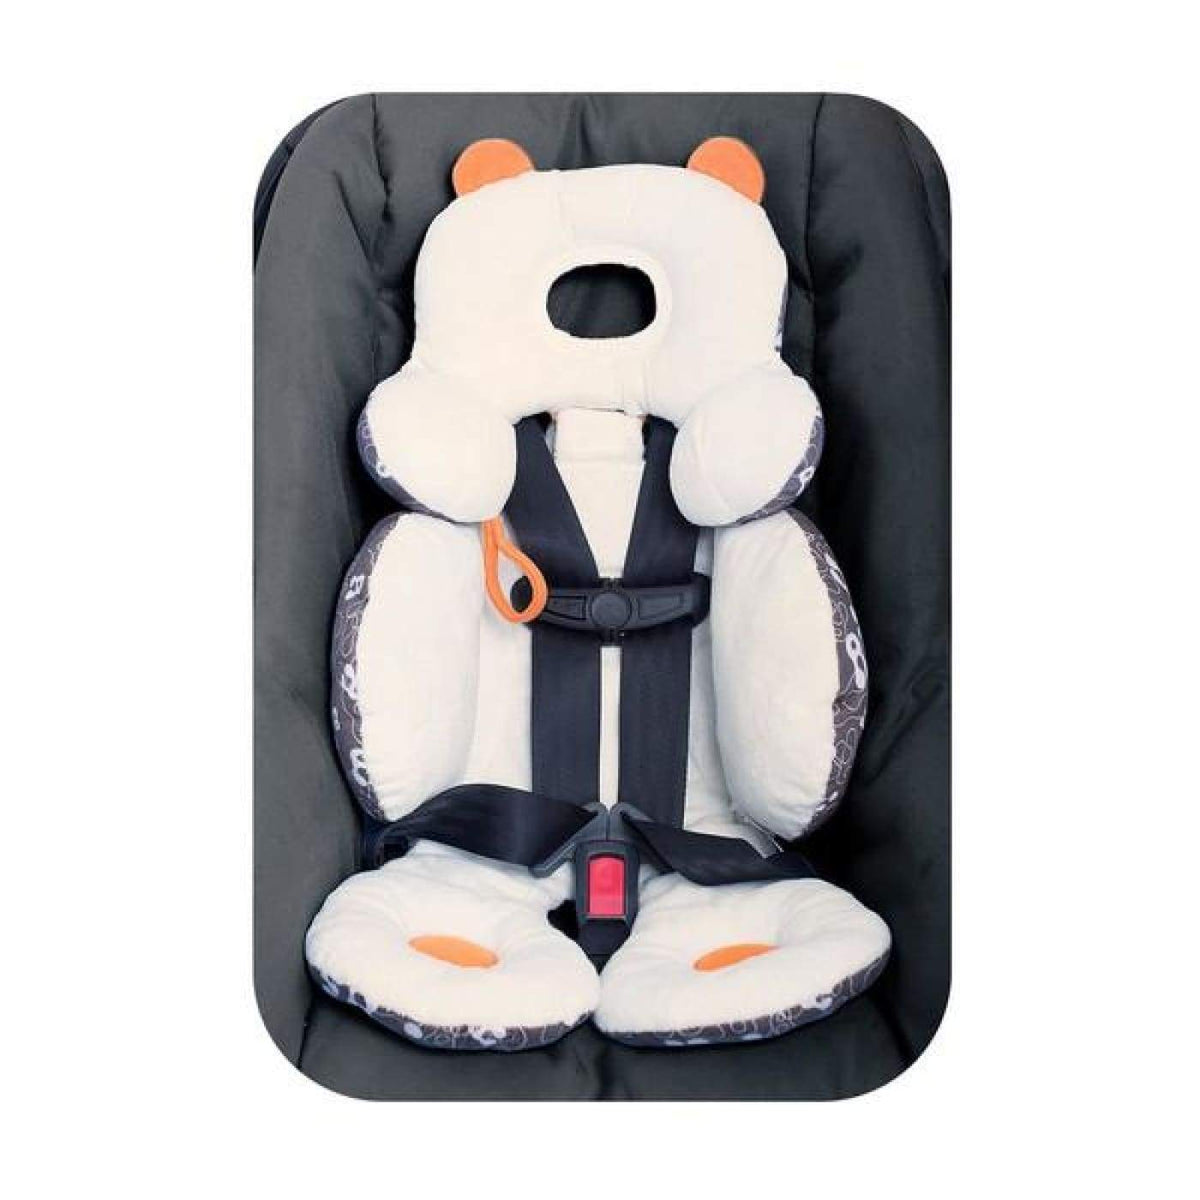 Benbat Reversible Body Support - White 0-12M - CAR SEATS - HEAD SUPPORTS/HARNESS COVERS